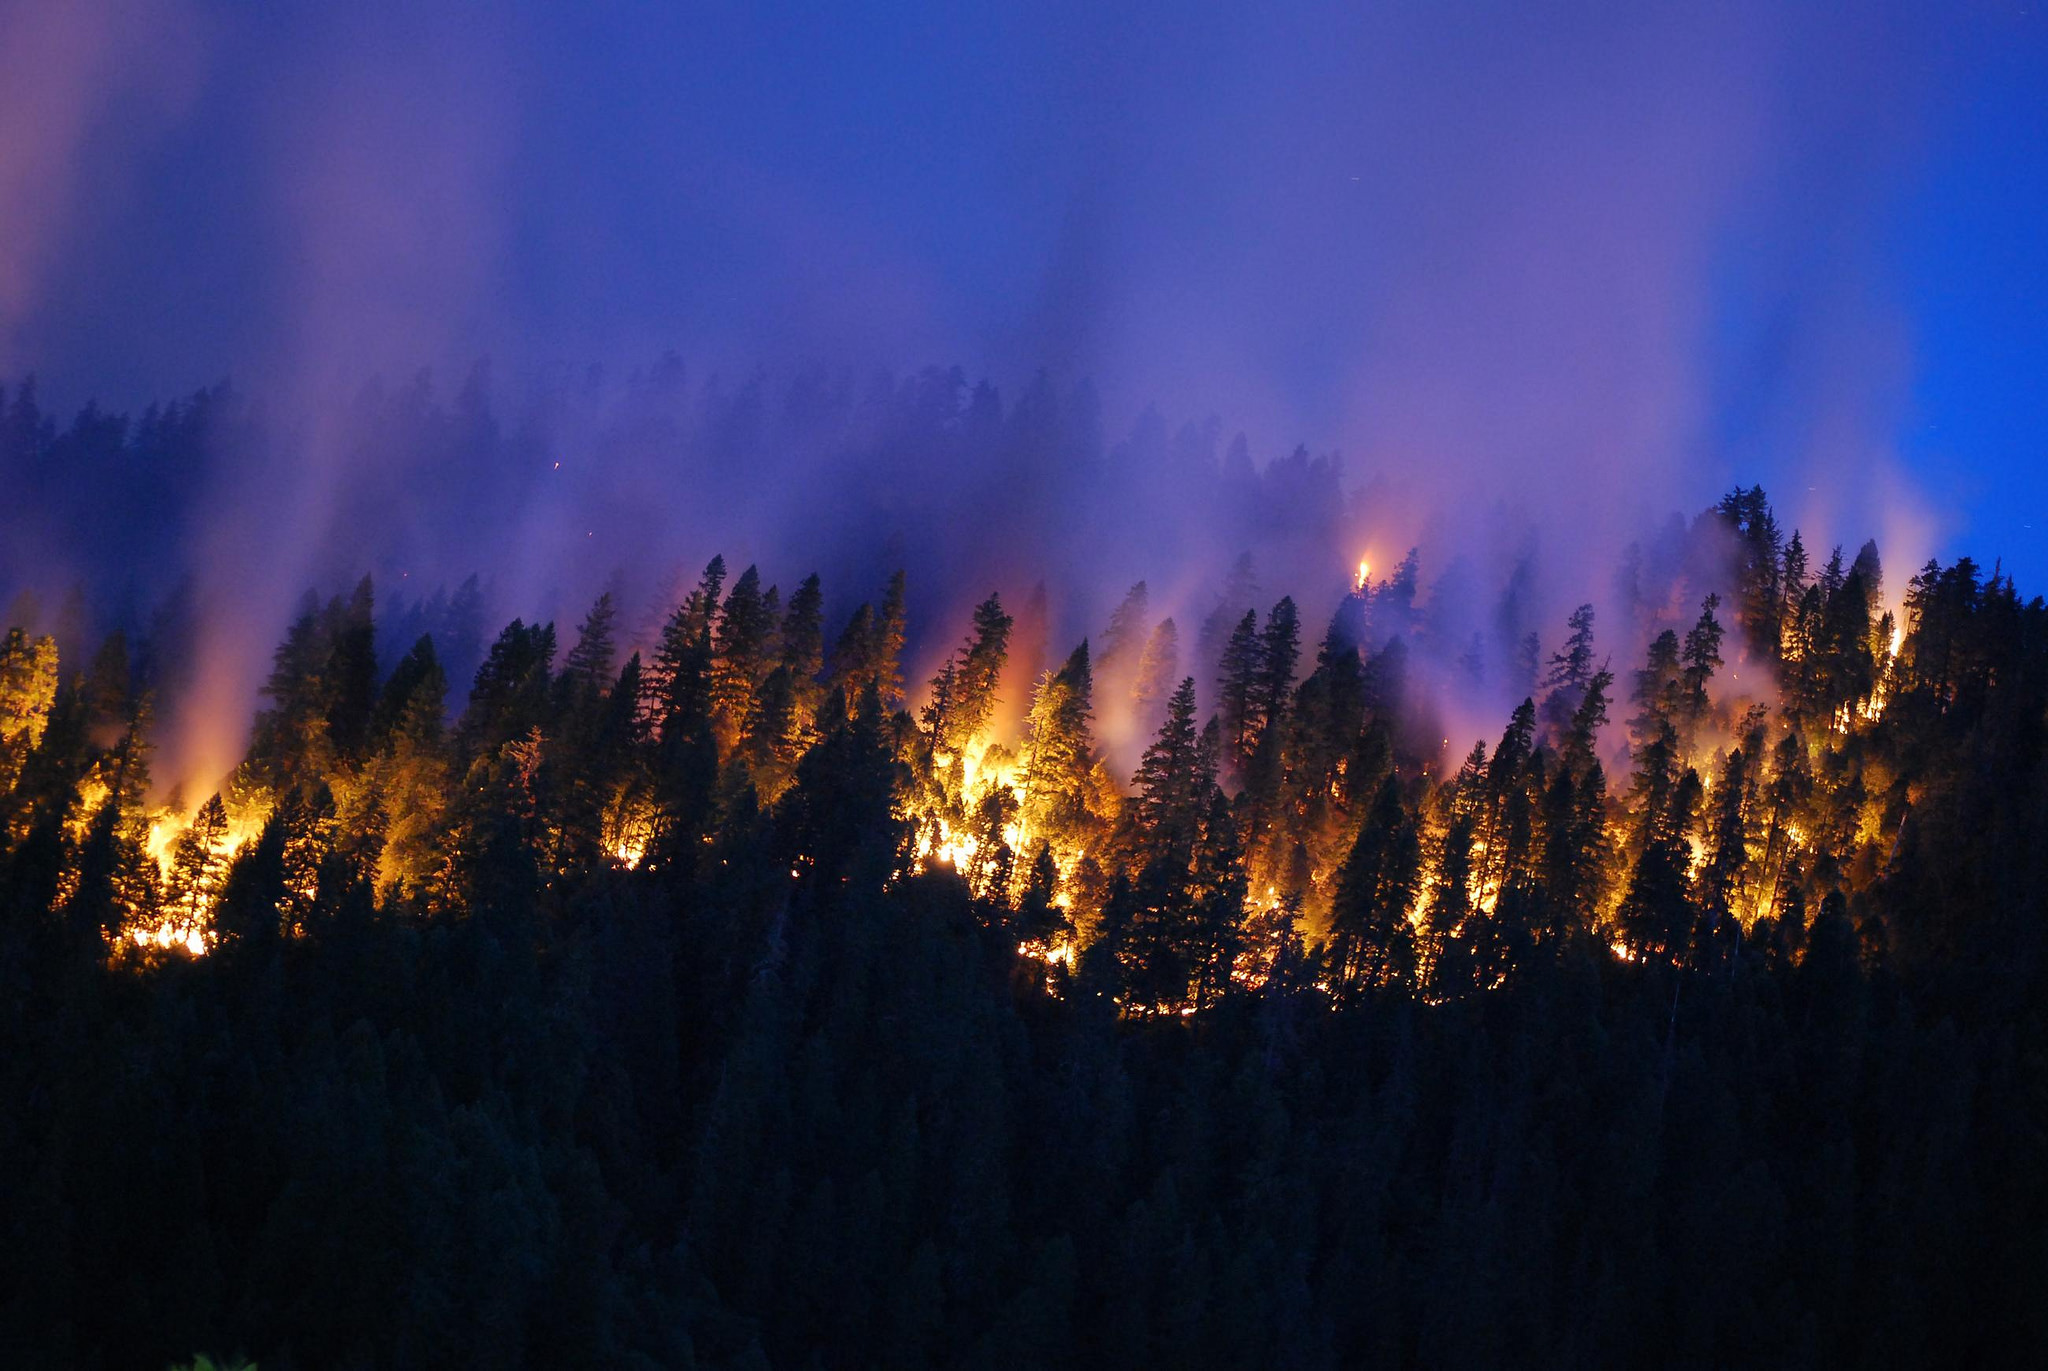 September 2014 Happy Camp Complex Fire in the Klamath National Forest in California.